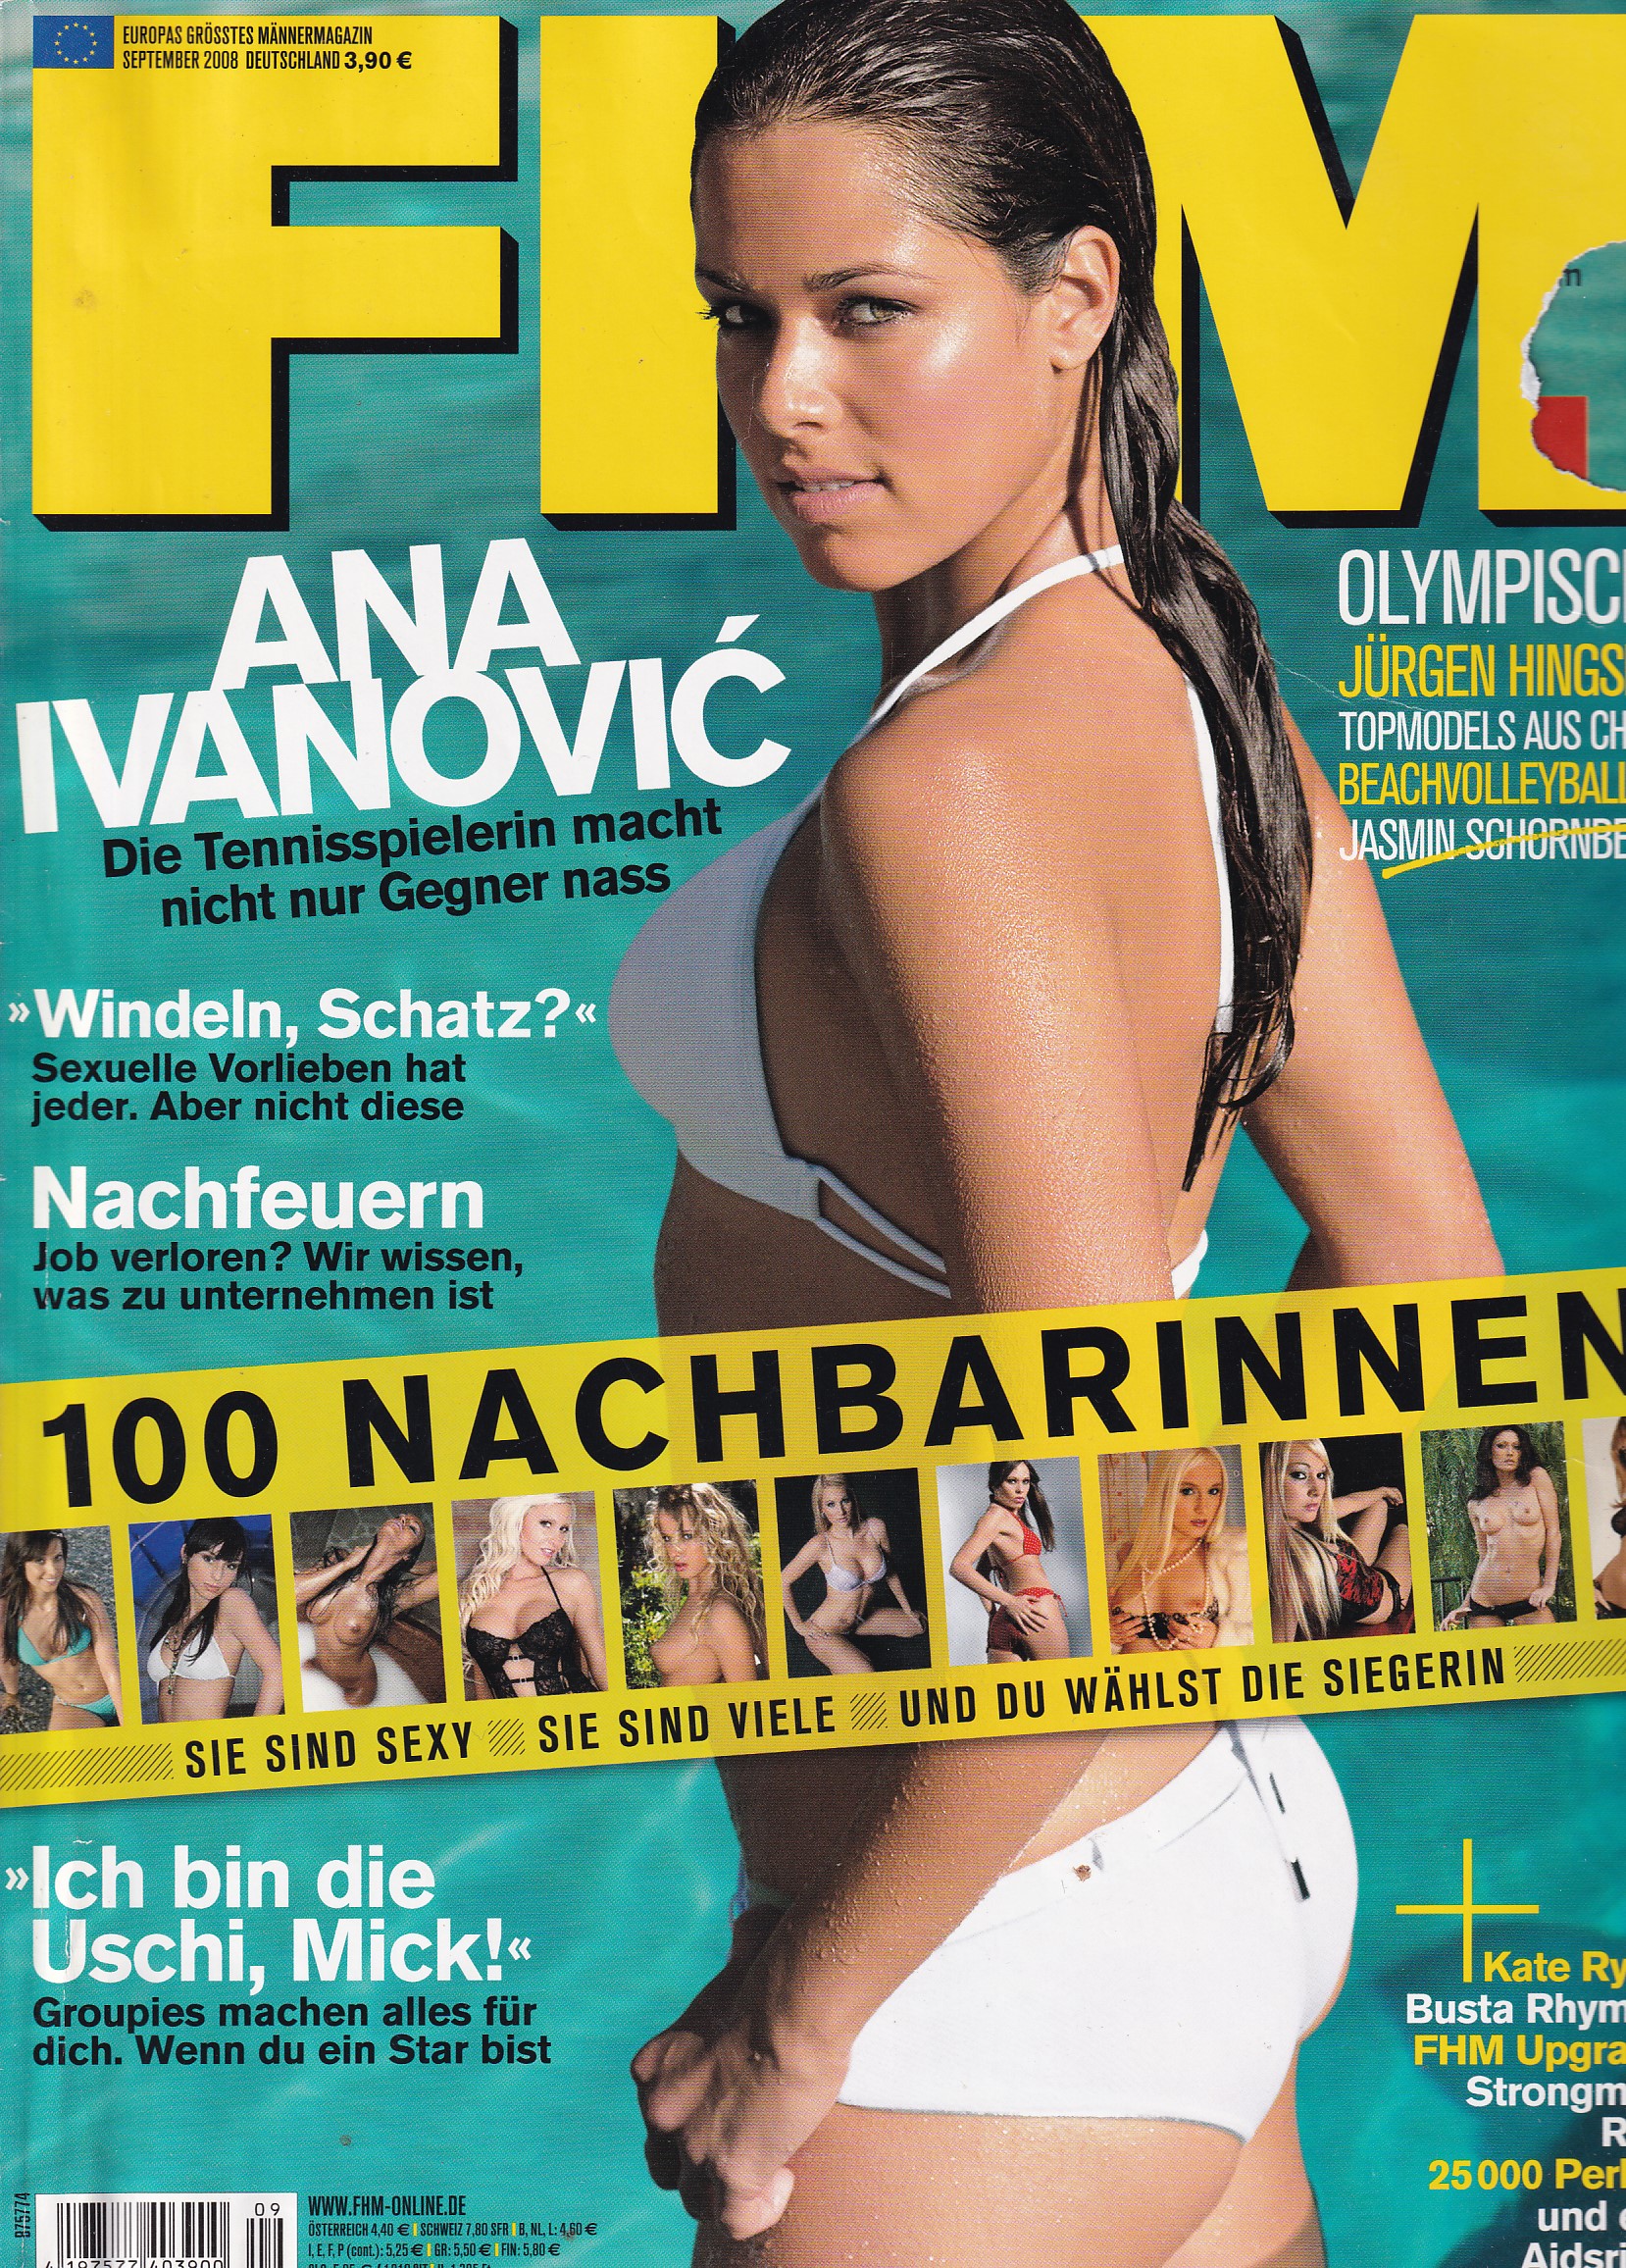 FHM - FOR HIM MAGAZINE - 2008 August